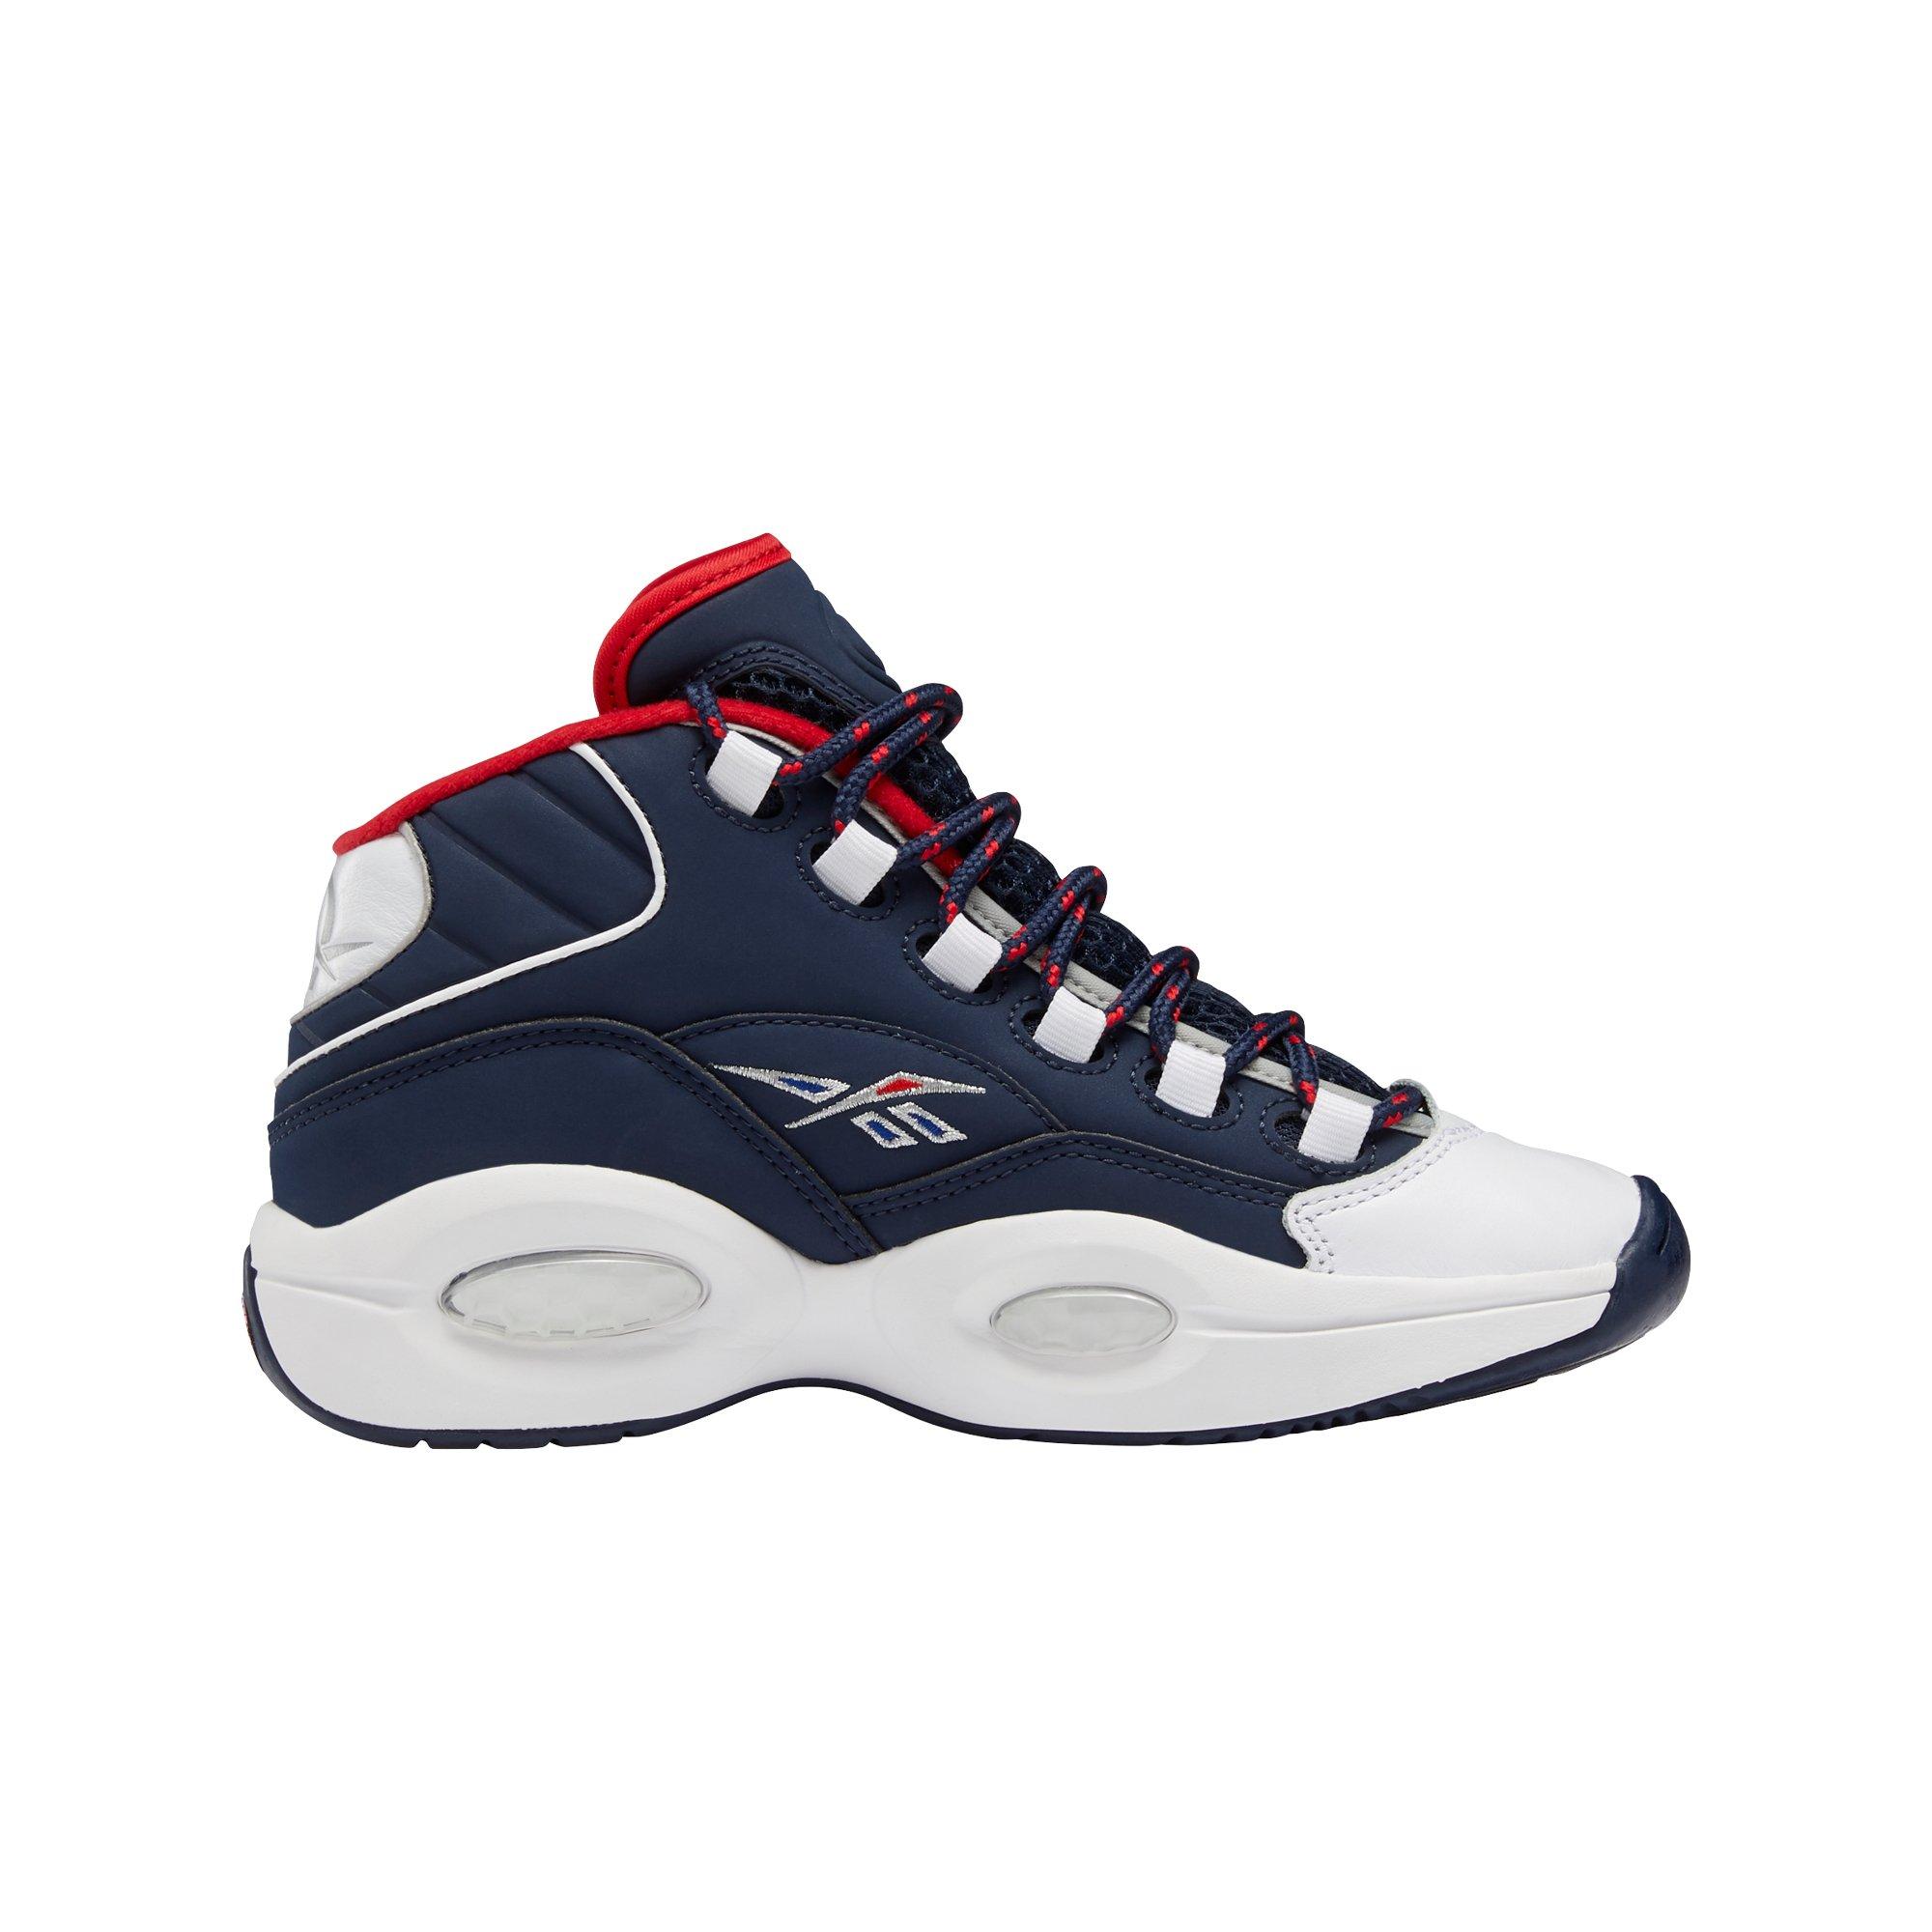 Reebok Question Mid 'Street Sleigh' Toddlers' Shoes Black-Vector Red GV7184 